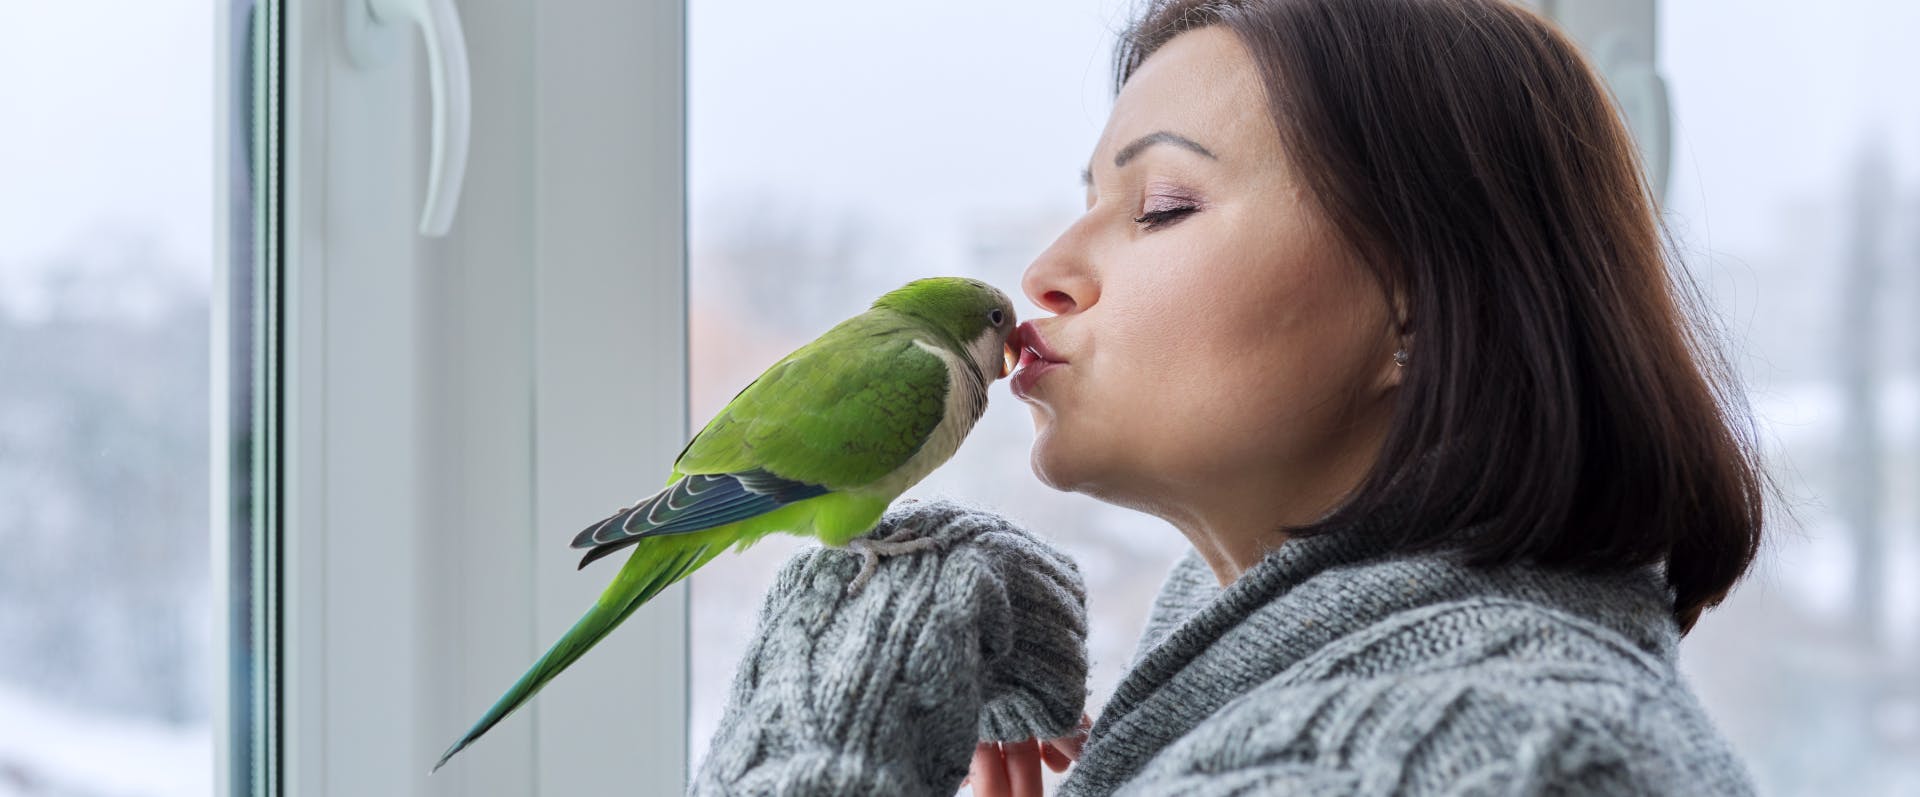 a bird sitter kissing the head of a green parakeet which is perched on the back of her raised hand